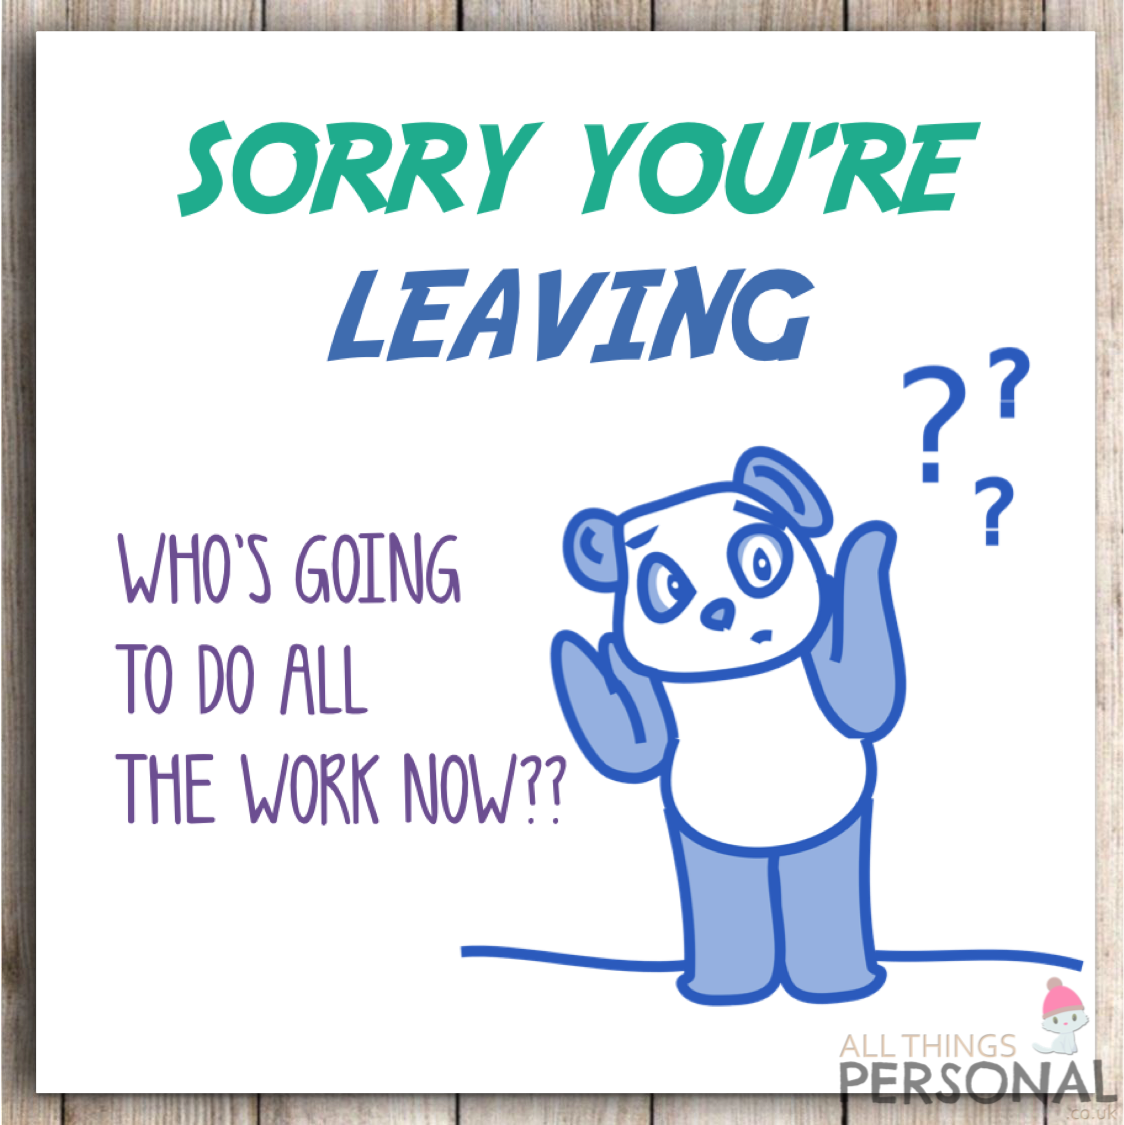 Funny Humorous Sorry Your Leaving Card For Work Colleagues Joke Sarcastic |  eBay